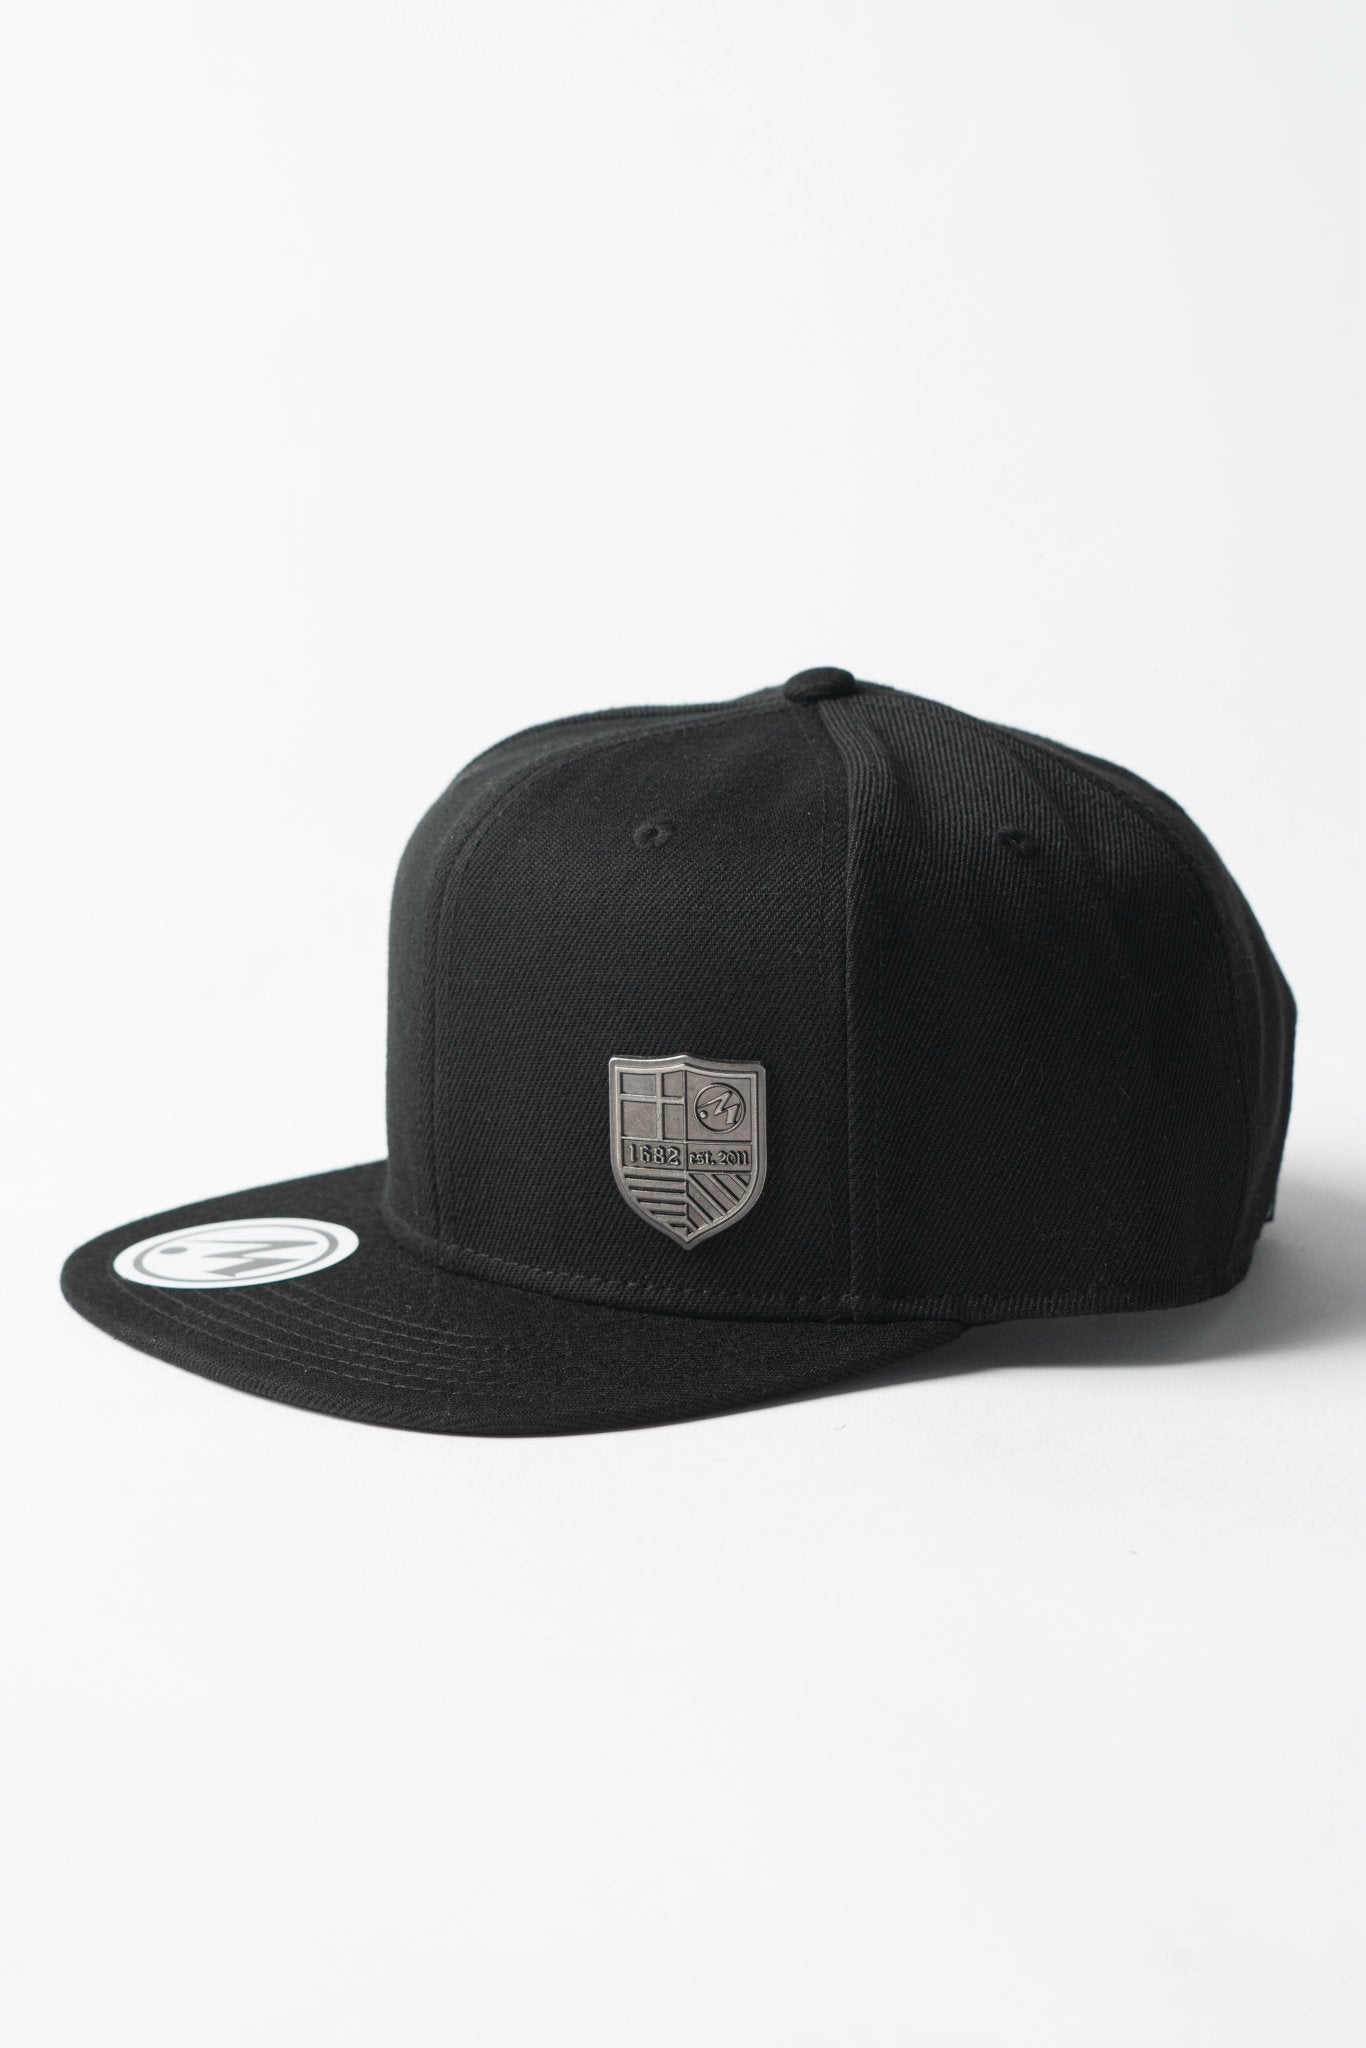 Tyrone Nelson Limited Edition Snap Back